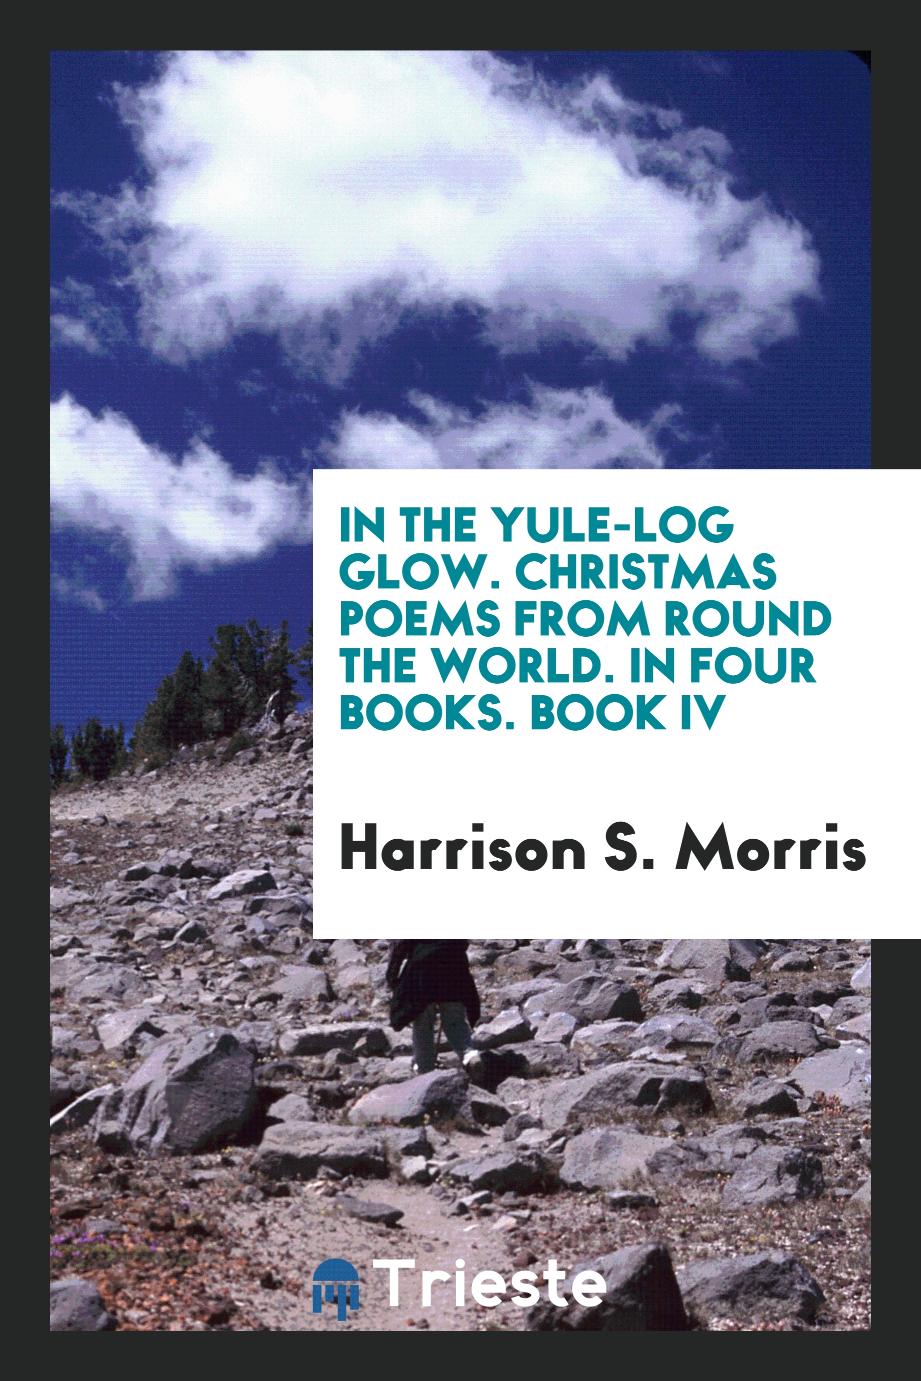 In the yule-log glow. Christmas poems from round the world. In four books. Book IV